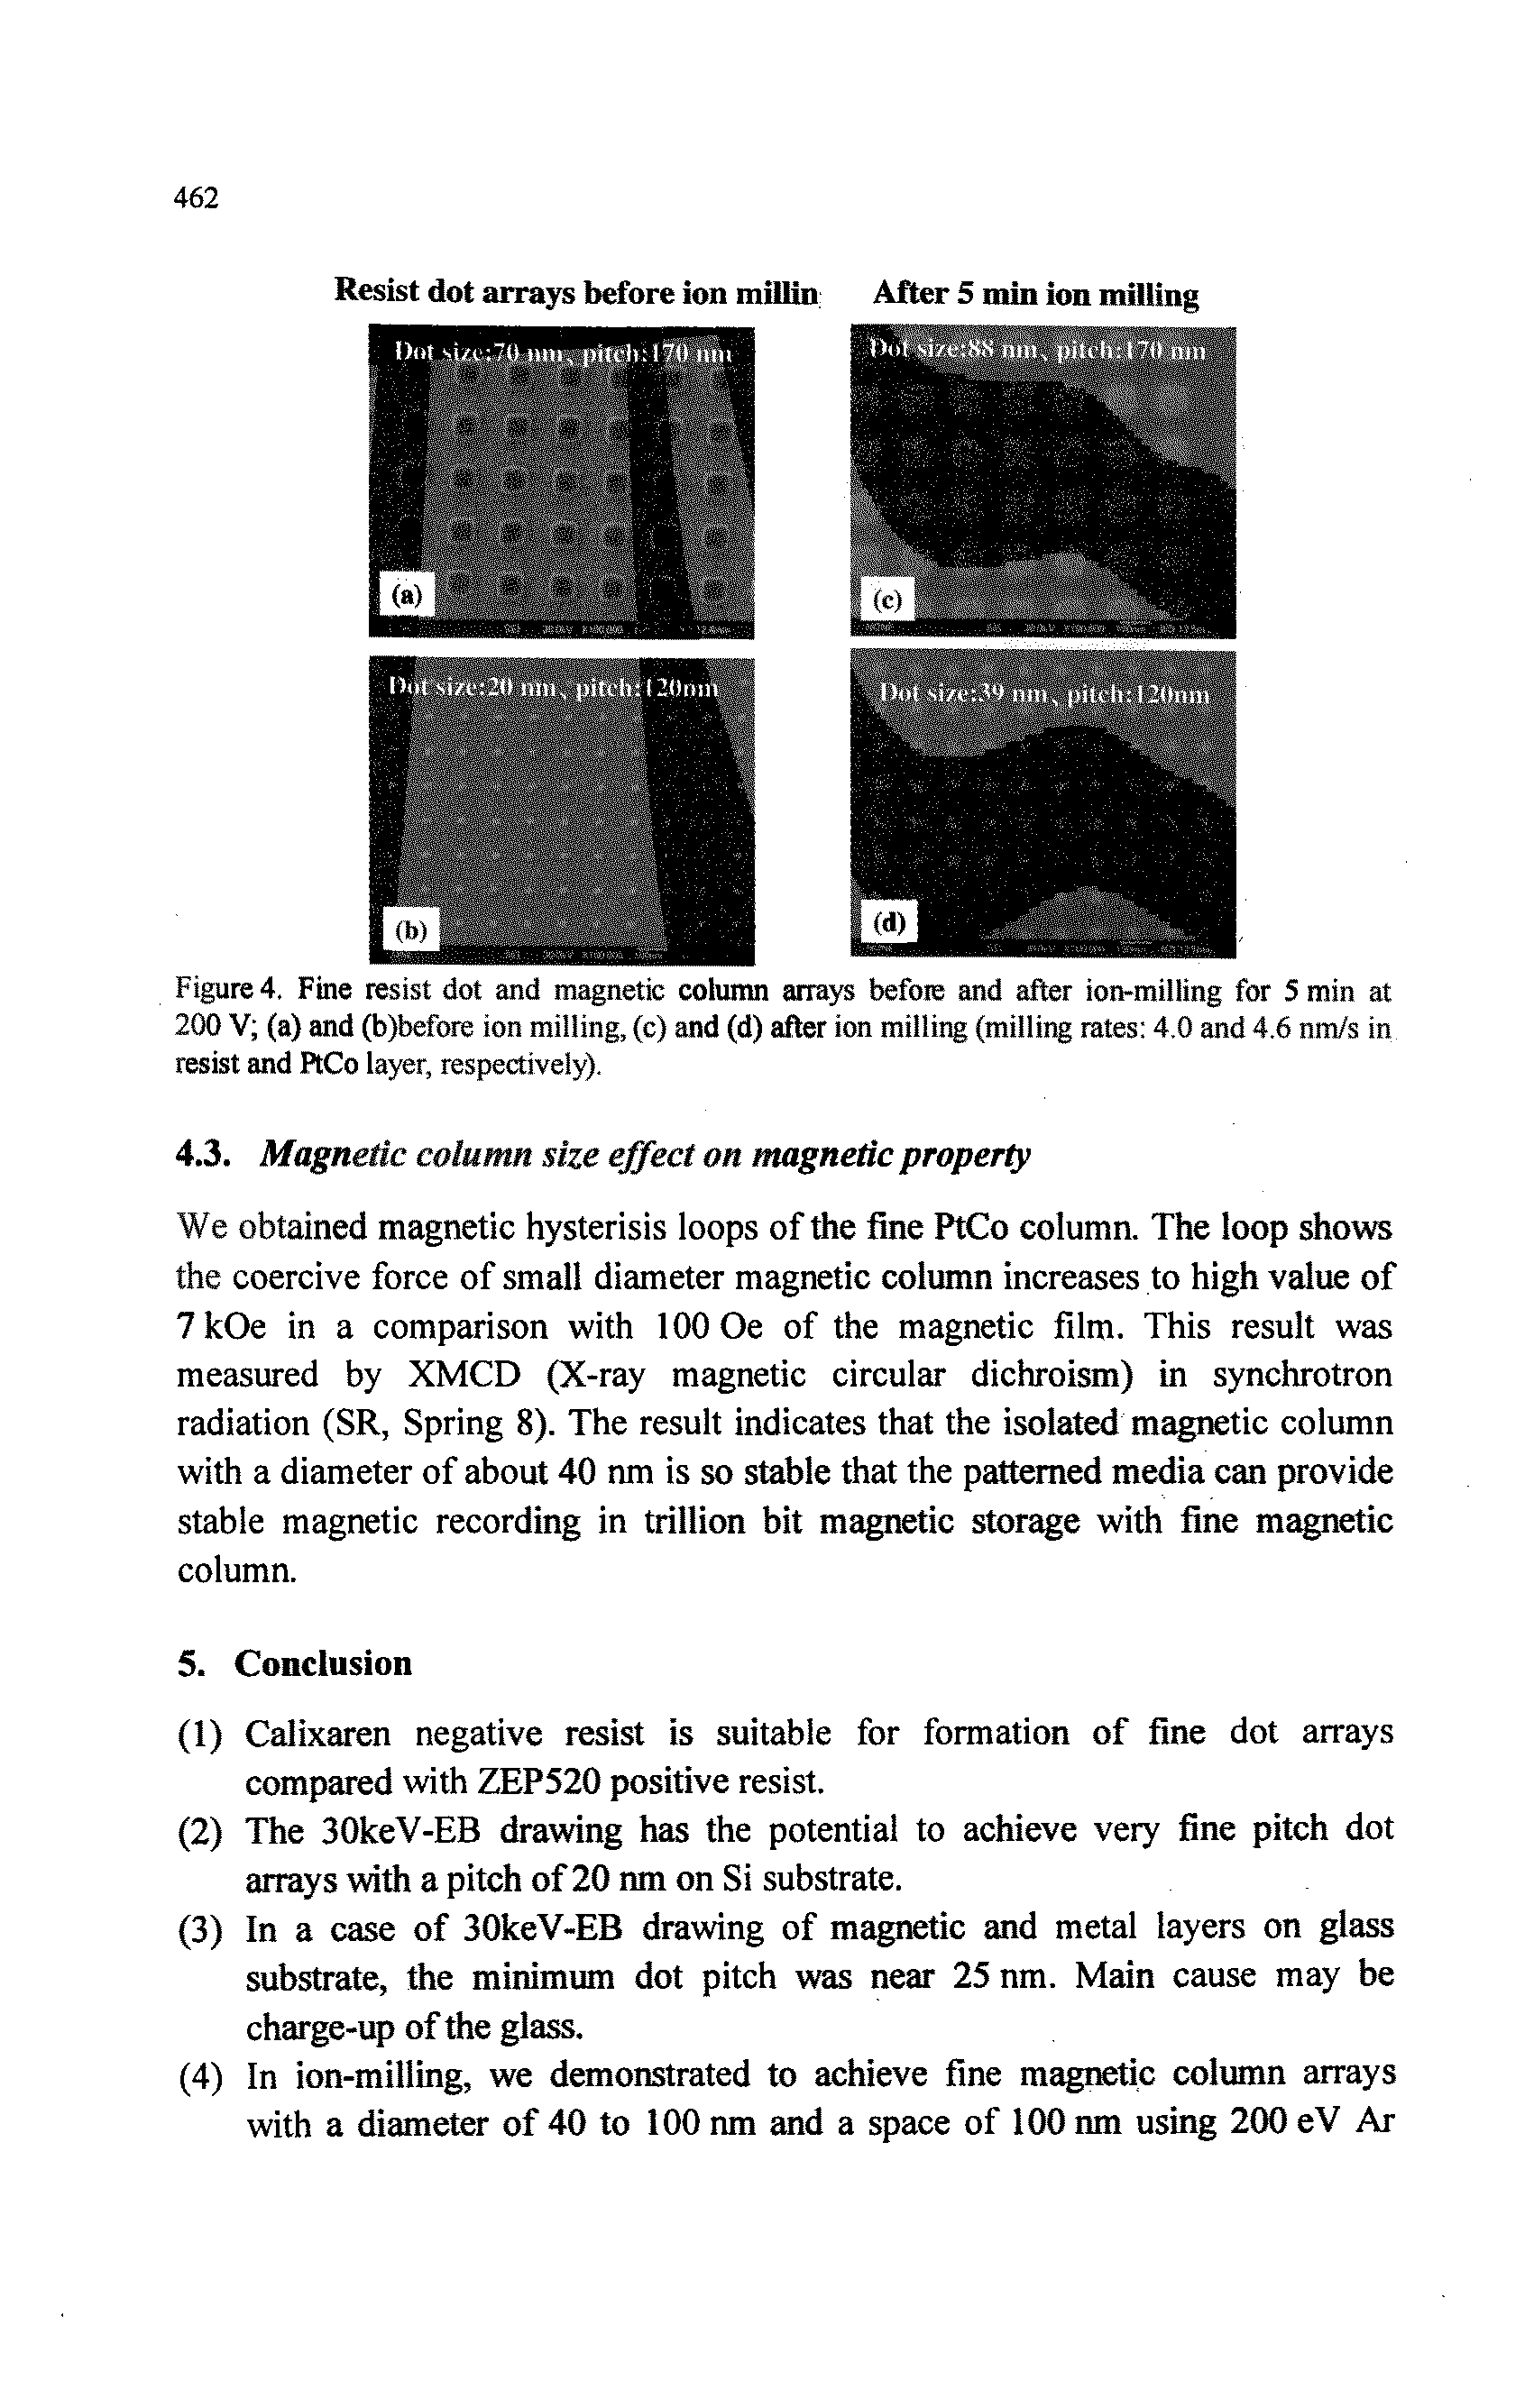 Figure 4. Fine resist dot and magnetic column arrays before and after ion-milling for 5 min at 200 V (a) and (b)before ion milling, (c) and (d) after ion milling (milling rates 4.0 and 4.6 nm/s in resist and PtCo layer, respectively).